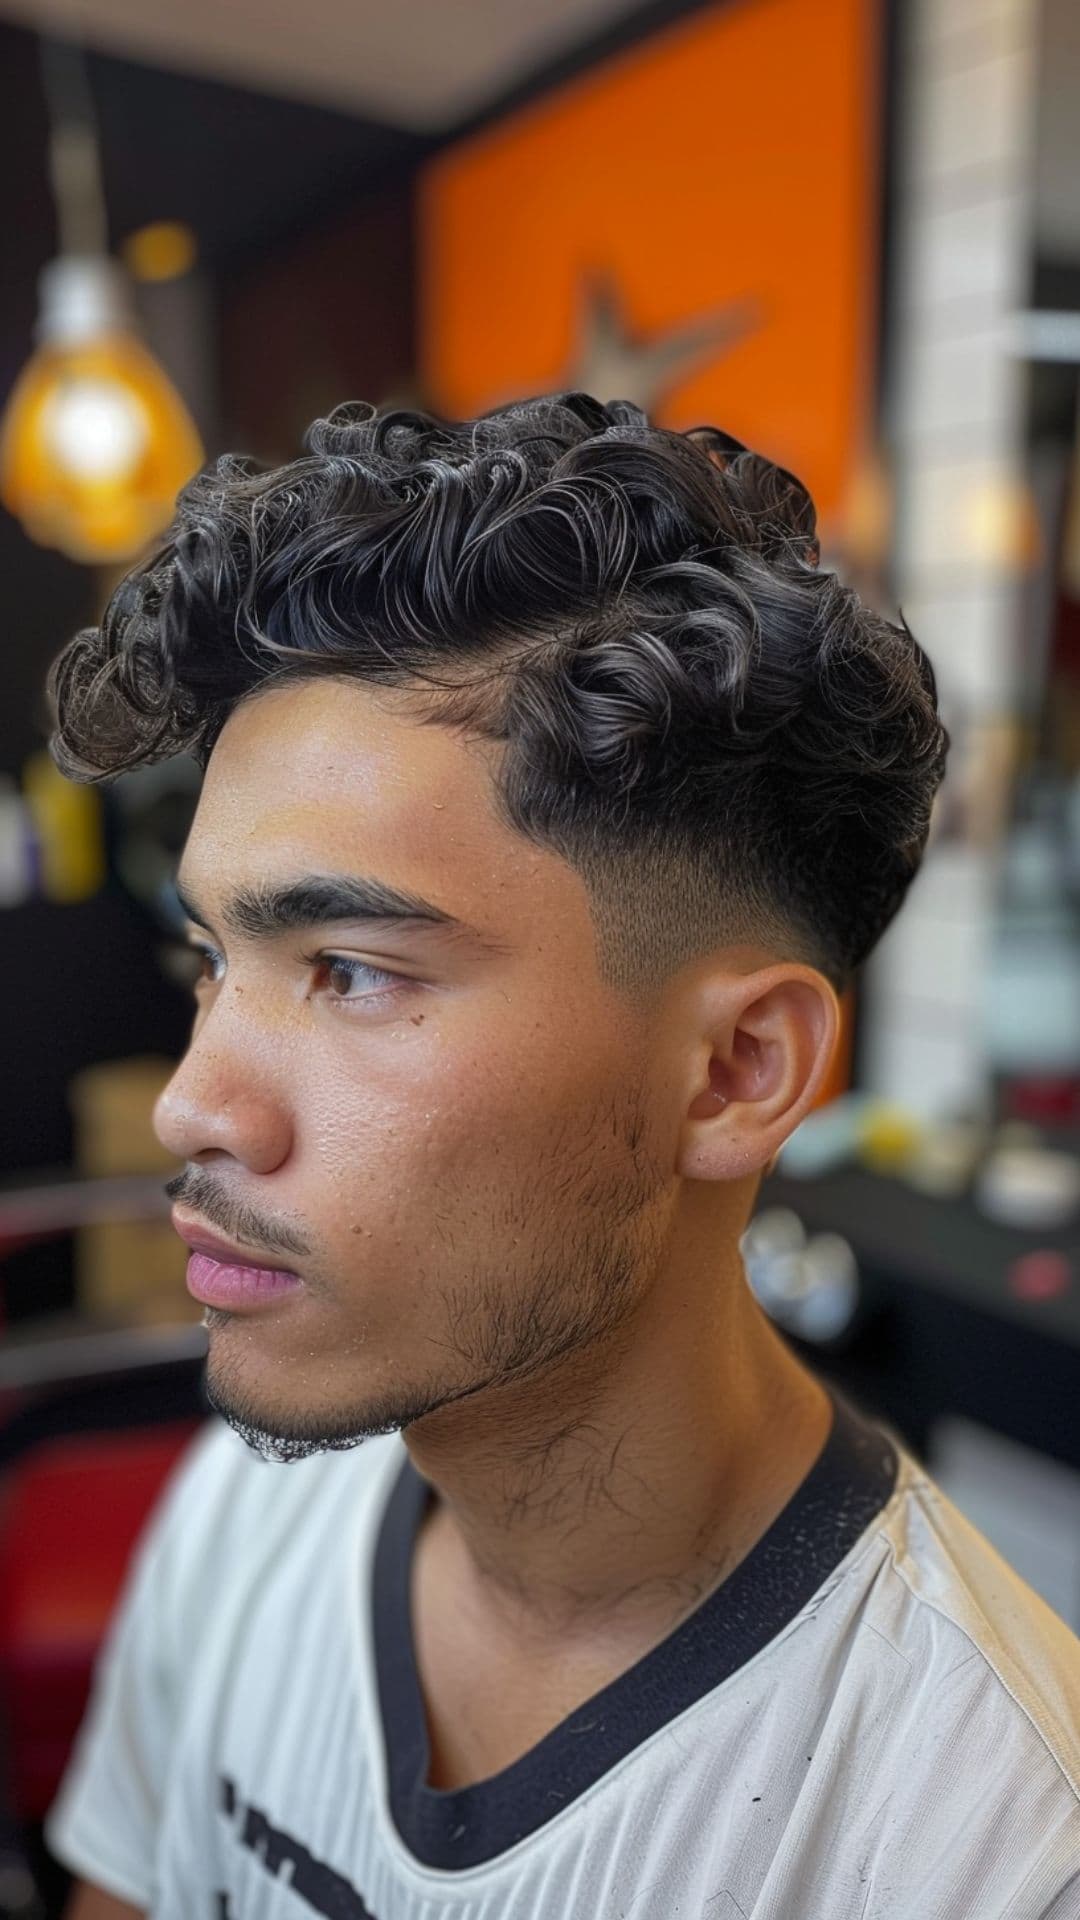 A man modelling a curly hair with side part.